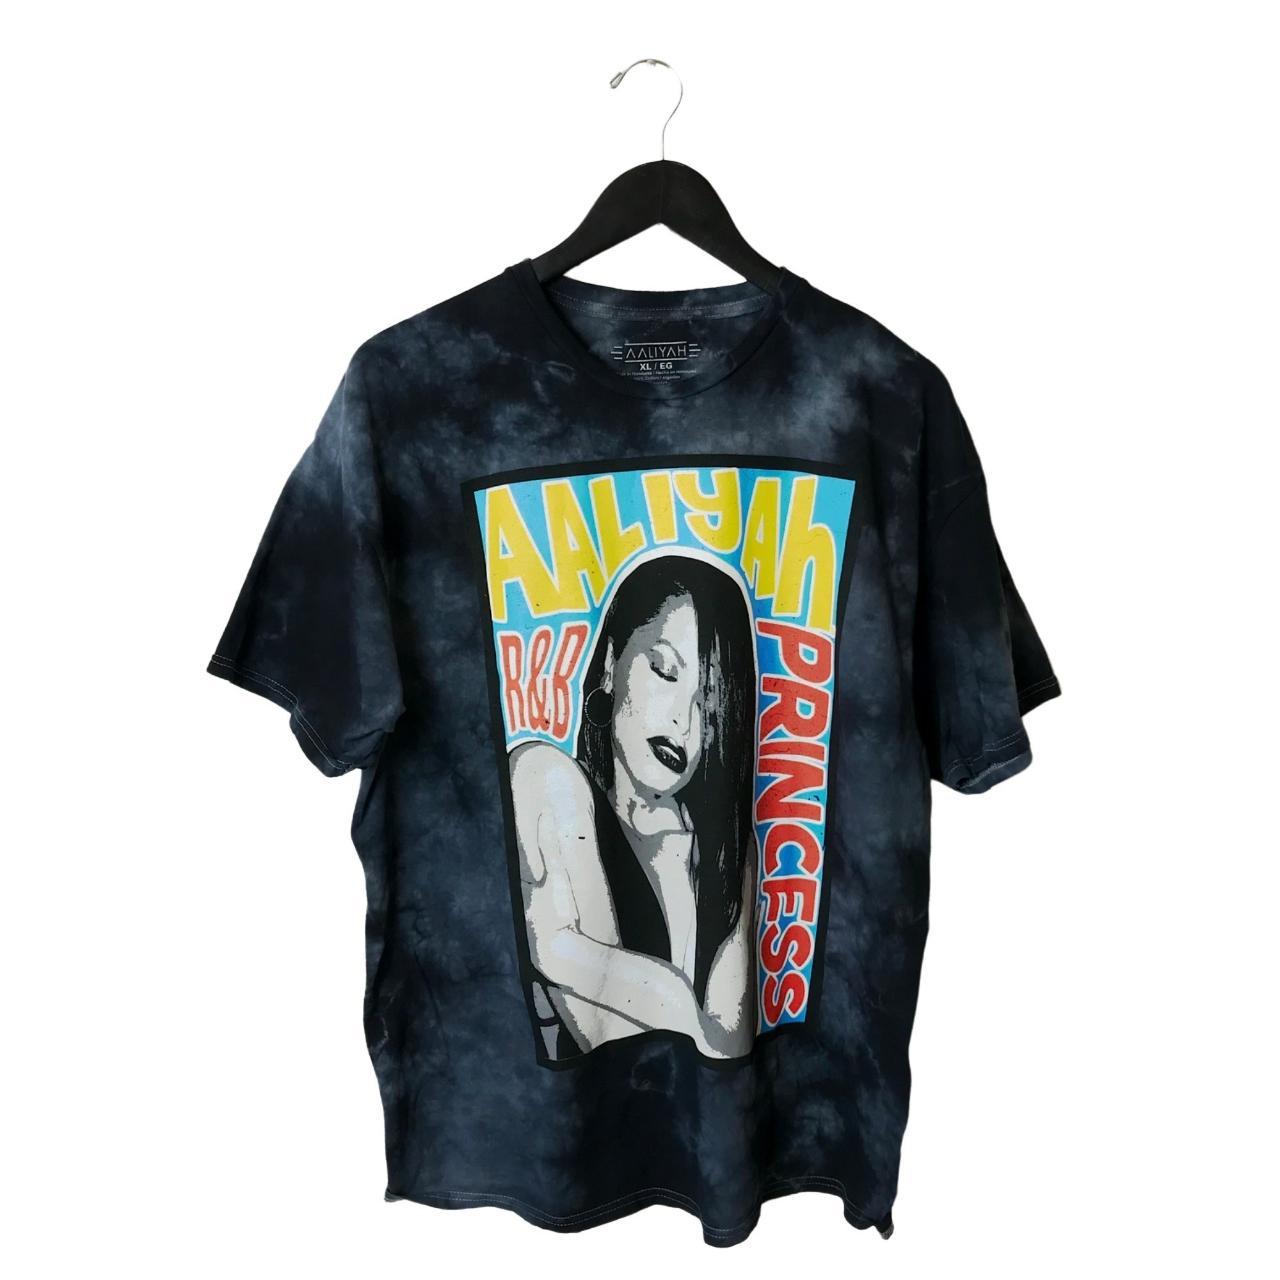 Product Image 1 - NEW Aaliyah Shirt Adult Extra